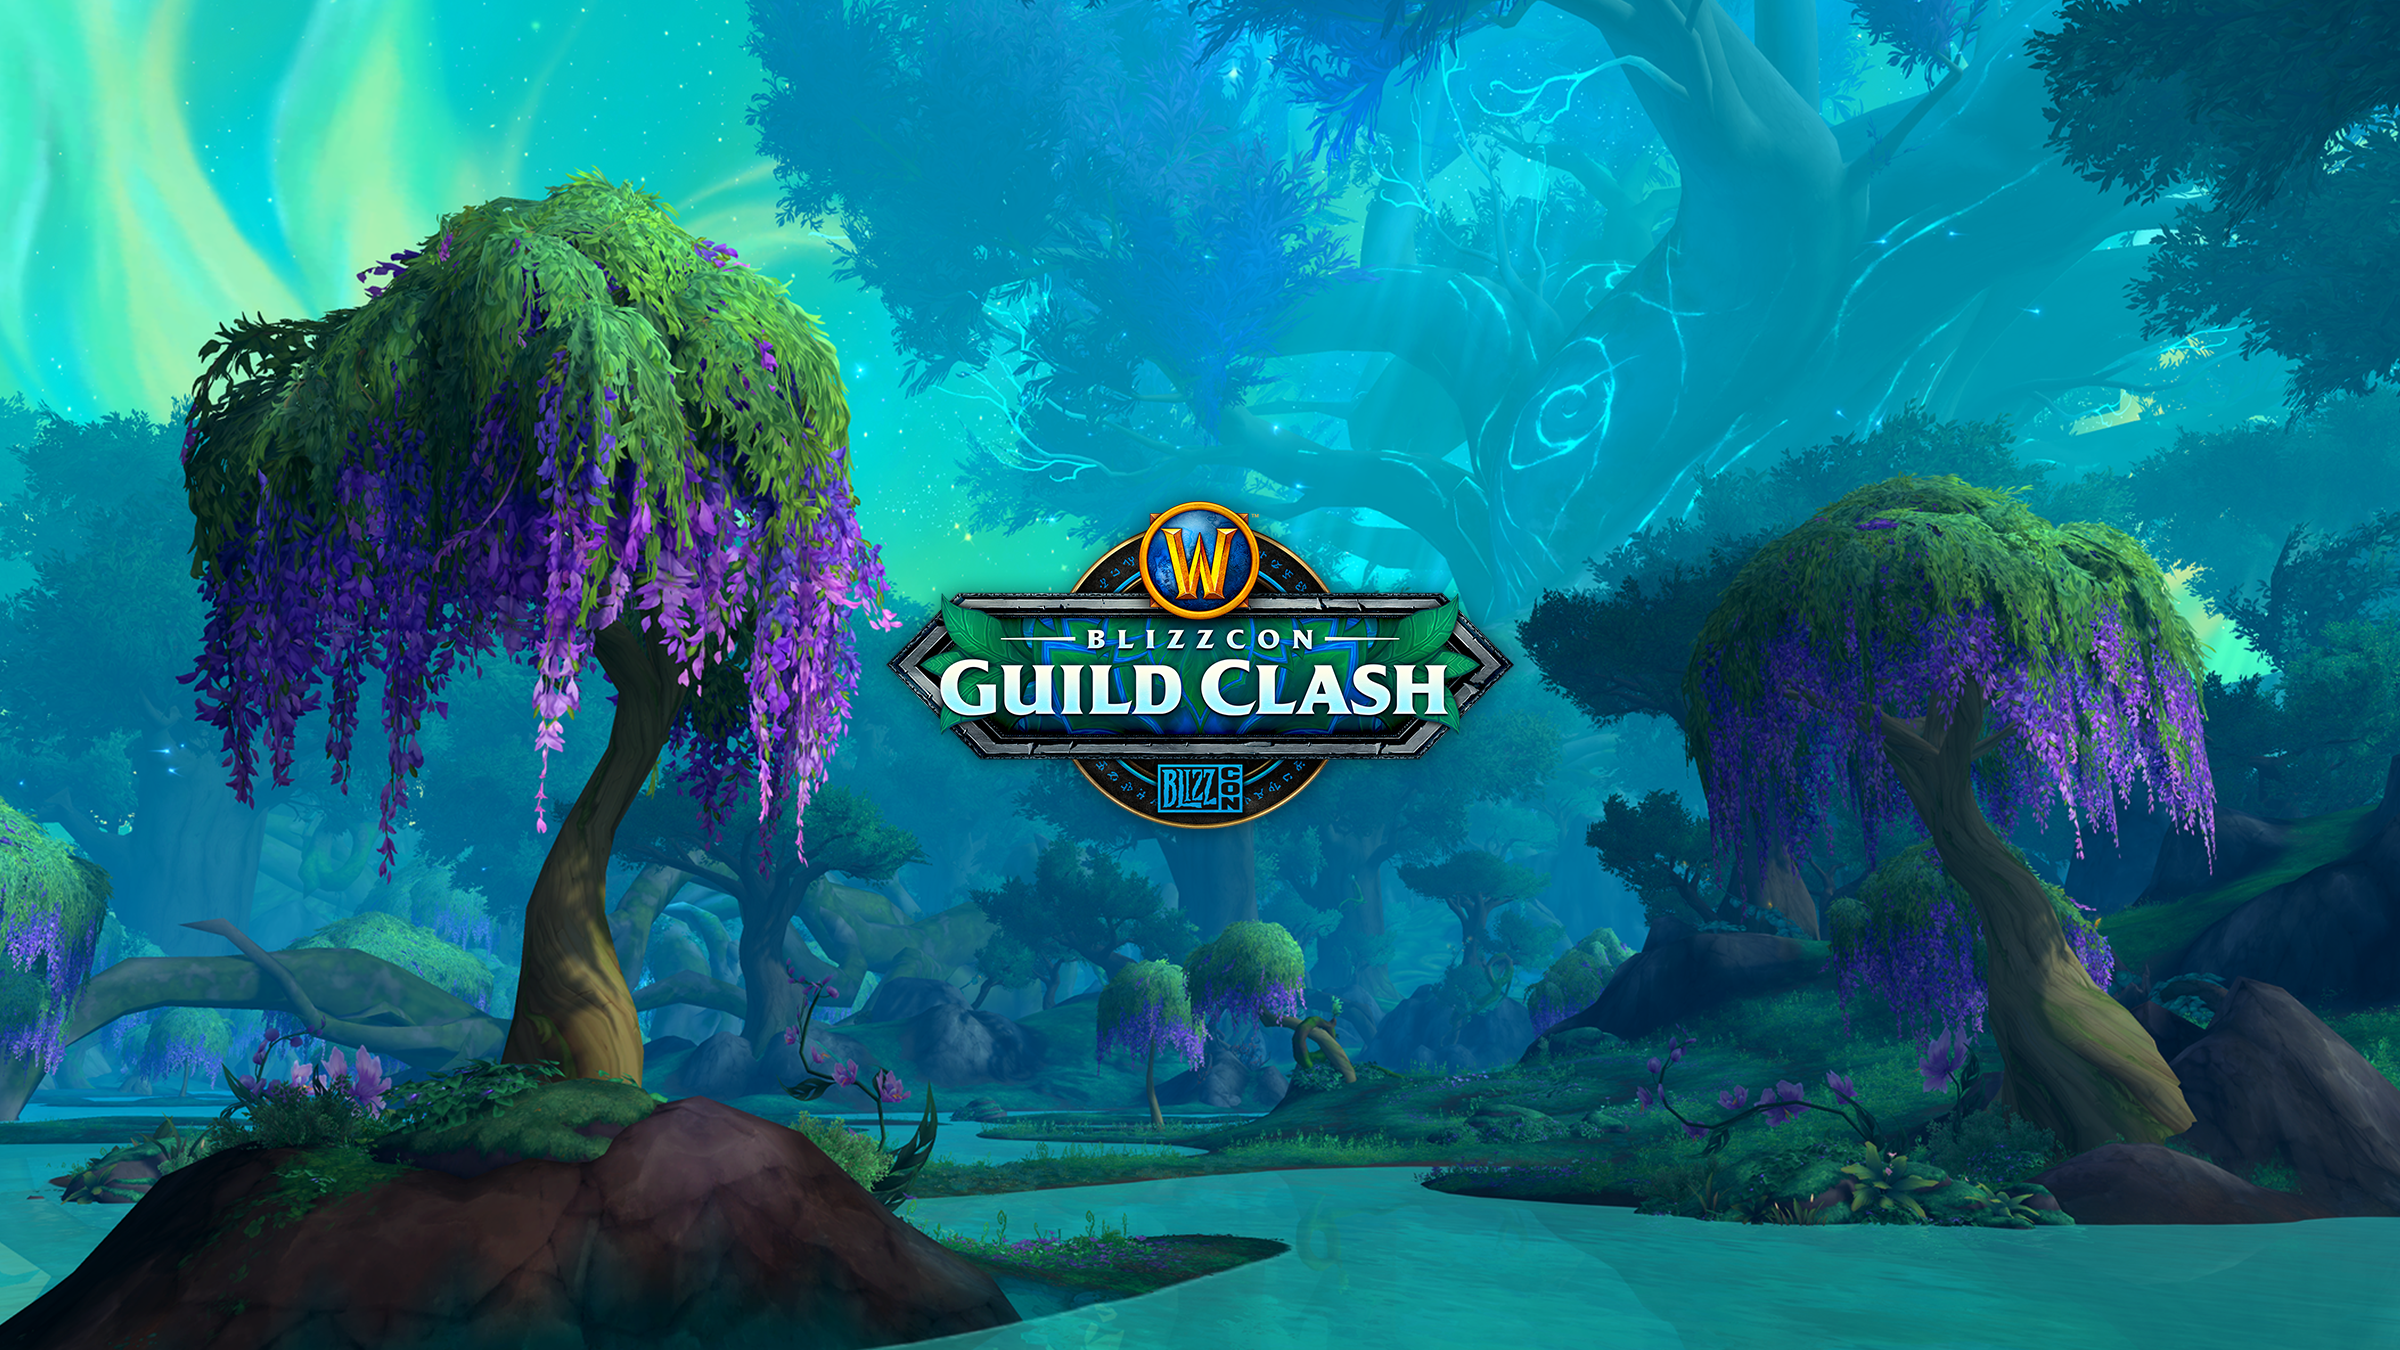 Tune in to the World of Warcraft® Guild Clash this weekend at BlizzCon® 2023!